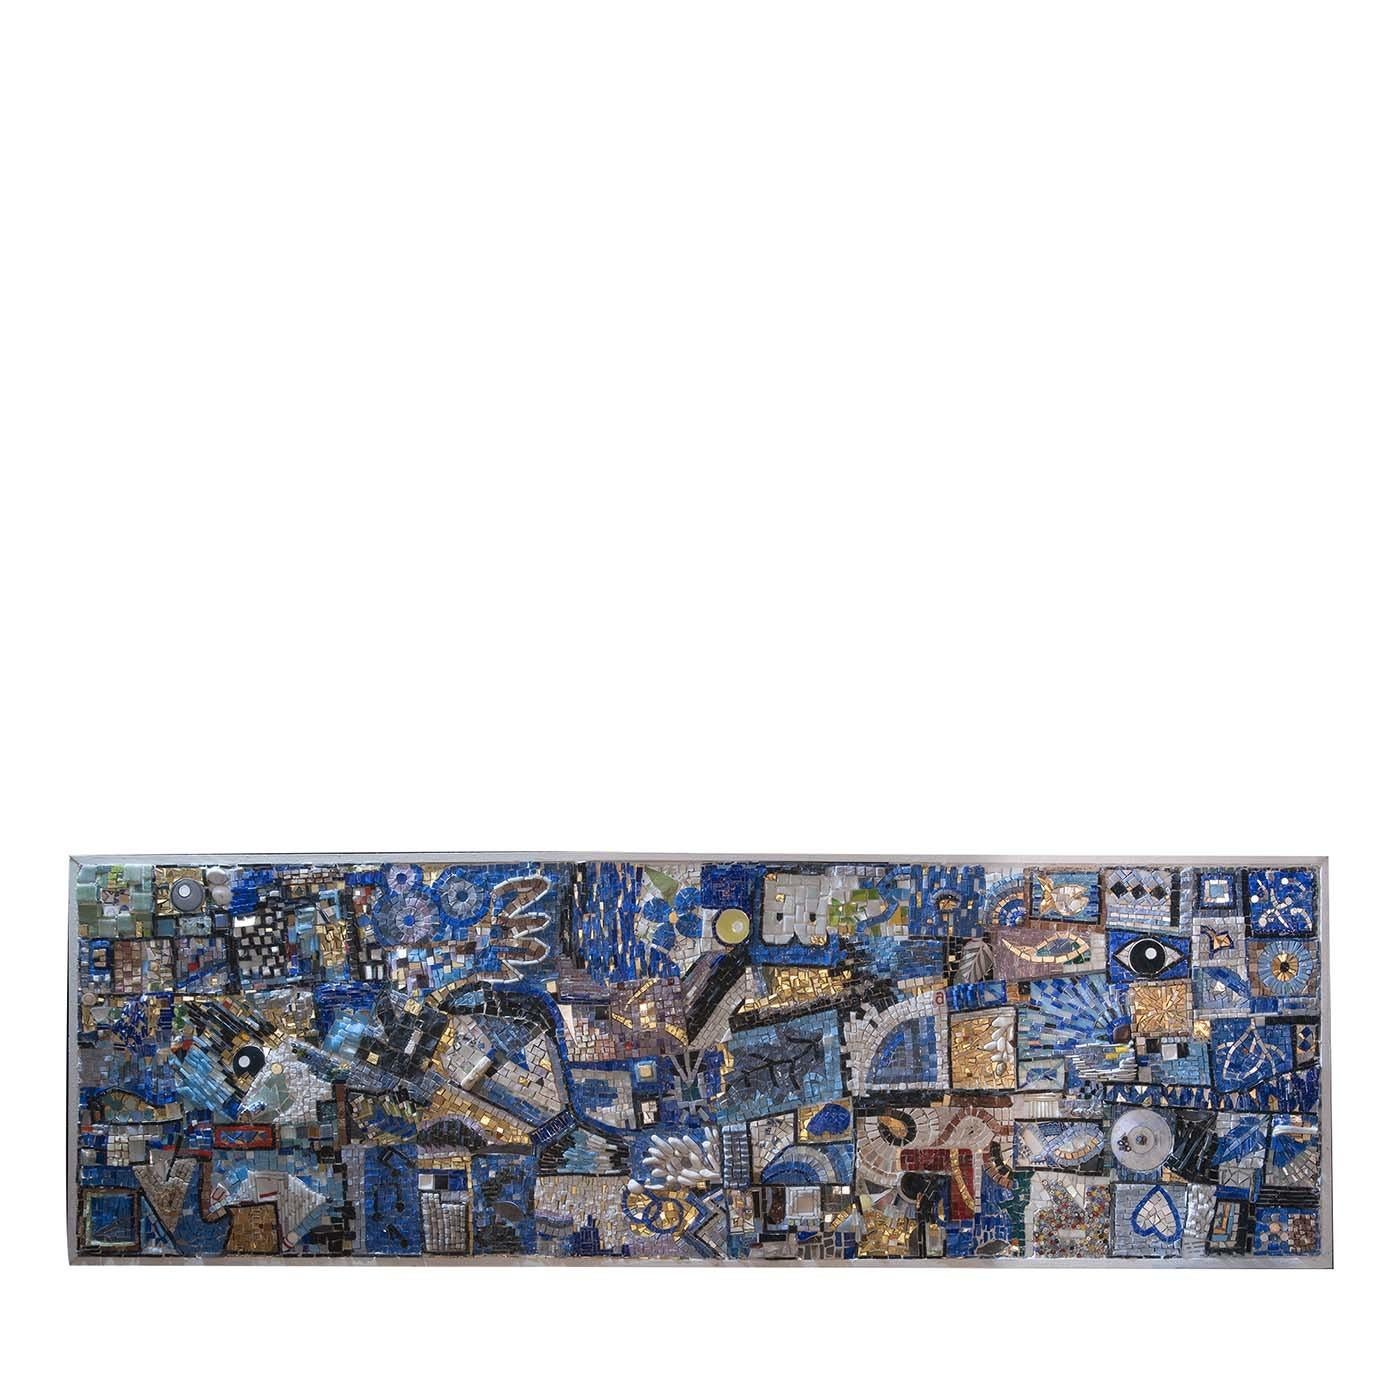 Poetically rendering the magnificence of the human mind with all its colorful dreams and multiform passions, this superb decorative panel is a mosaic crafted using the direct method of applying tiles on a panel. In this case, the rectangular base is